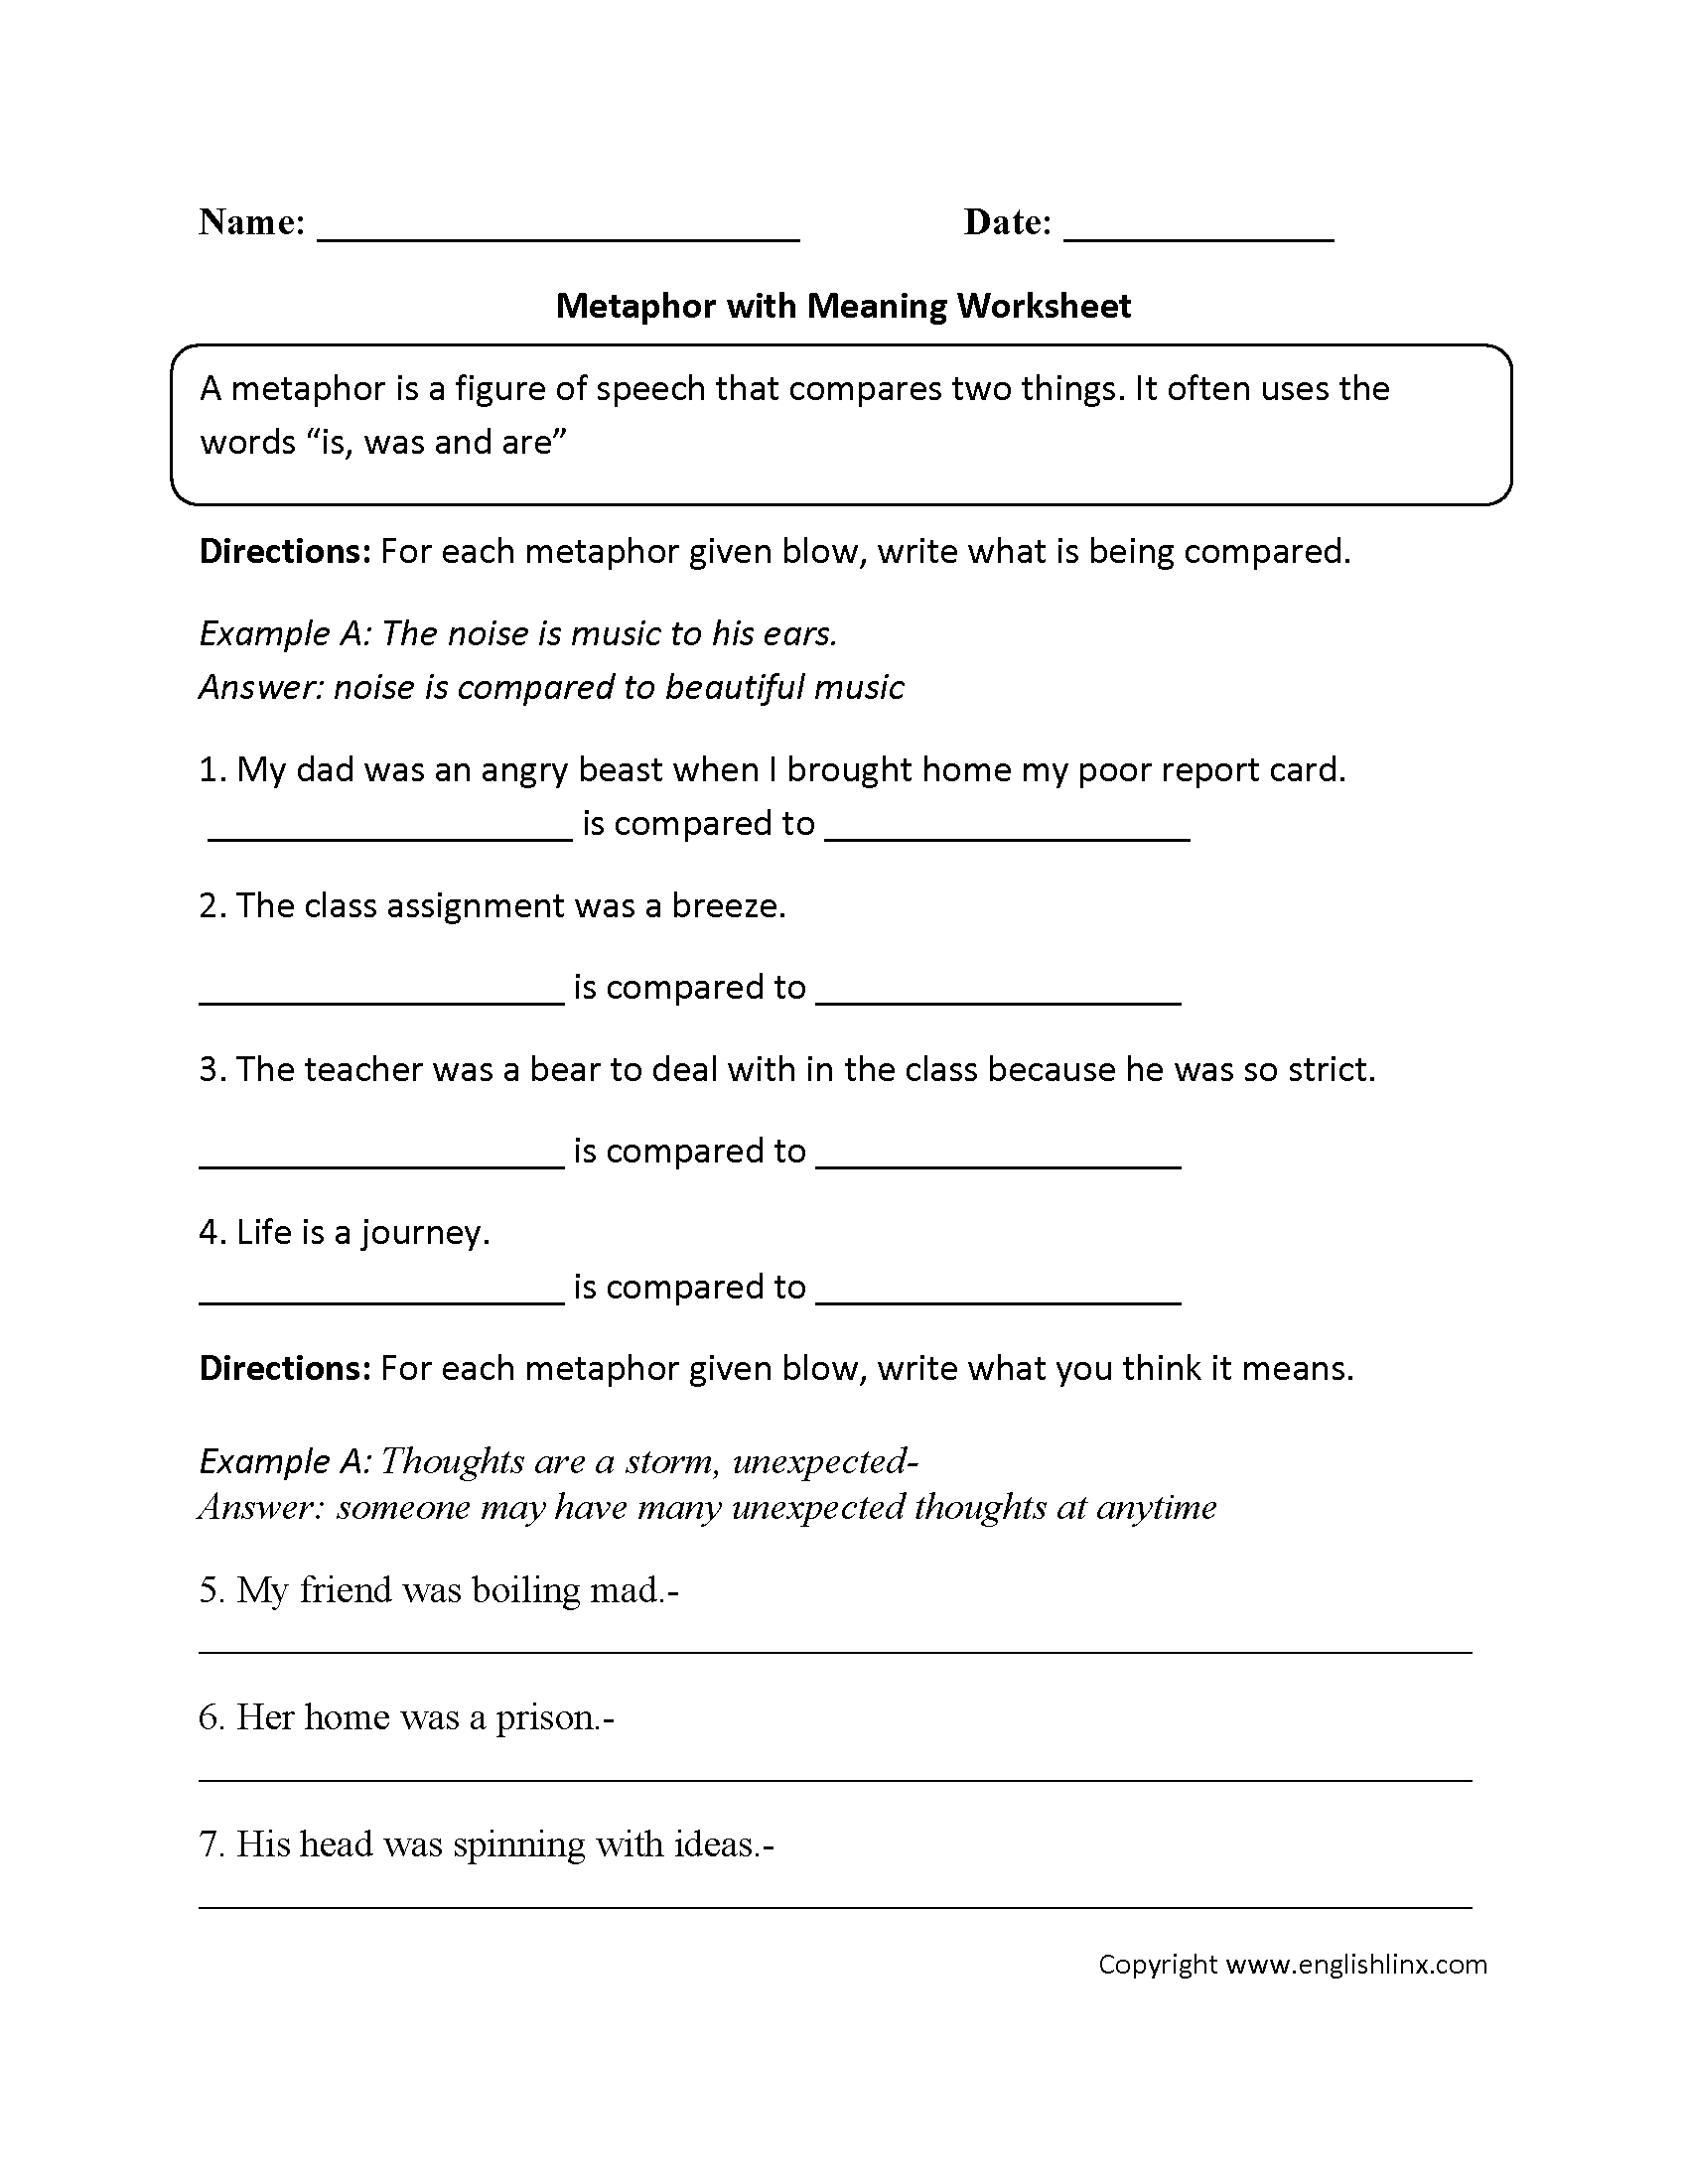 Metaphor with Meaning Worksheet